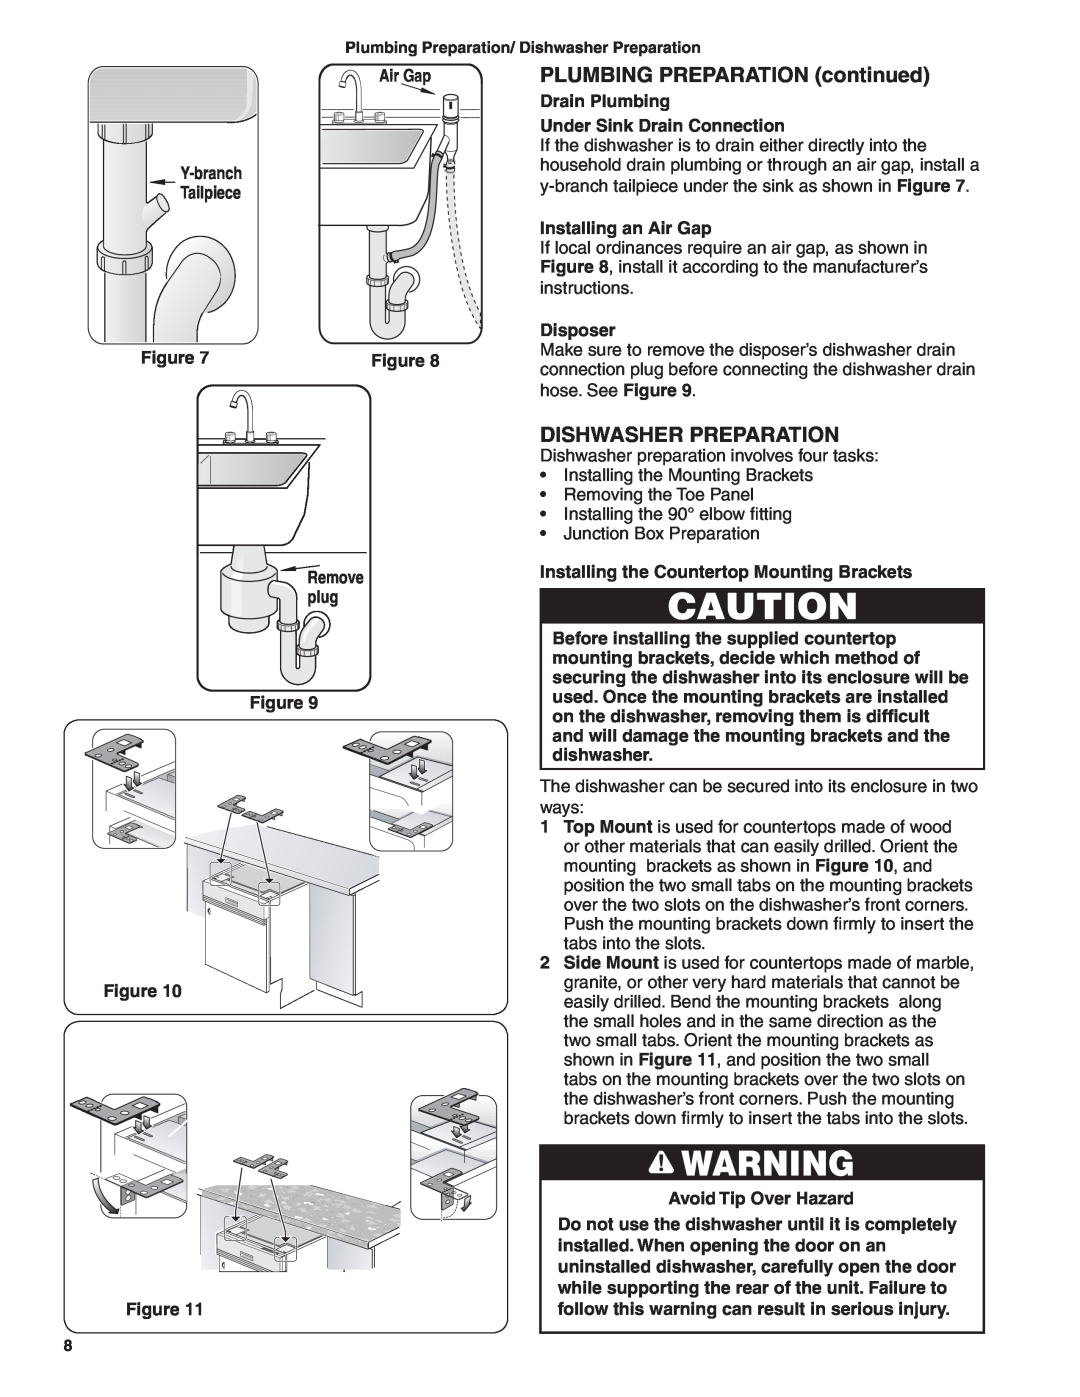 Bosch Appliances BSH Dishwasher important safety instructions PLUMBING PREPARATION continued, Dishwasher Preparation 